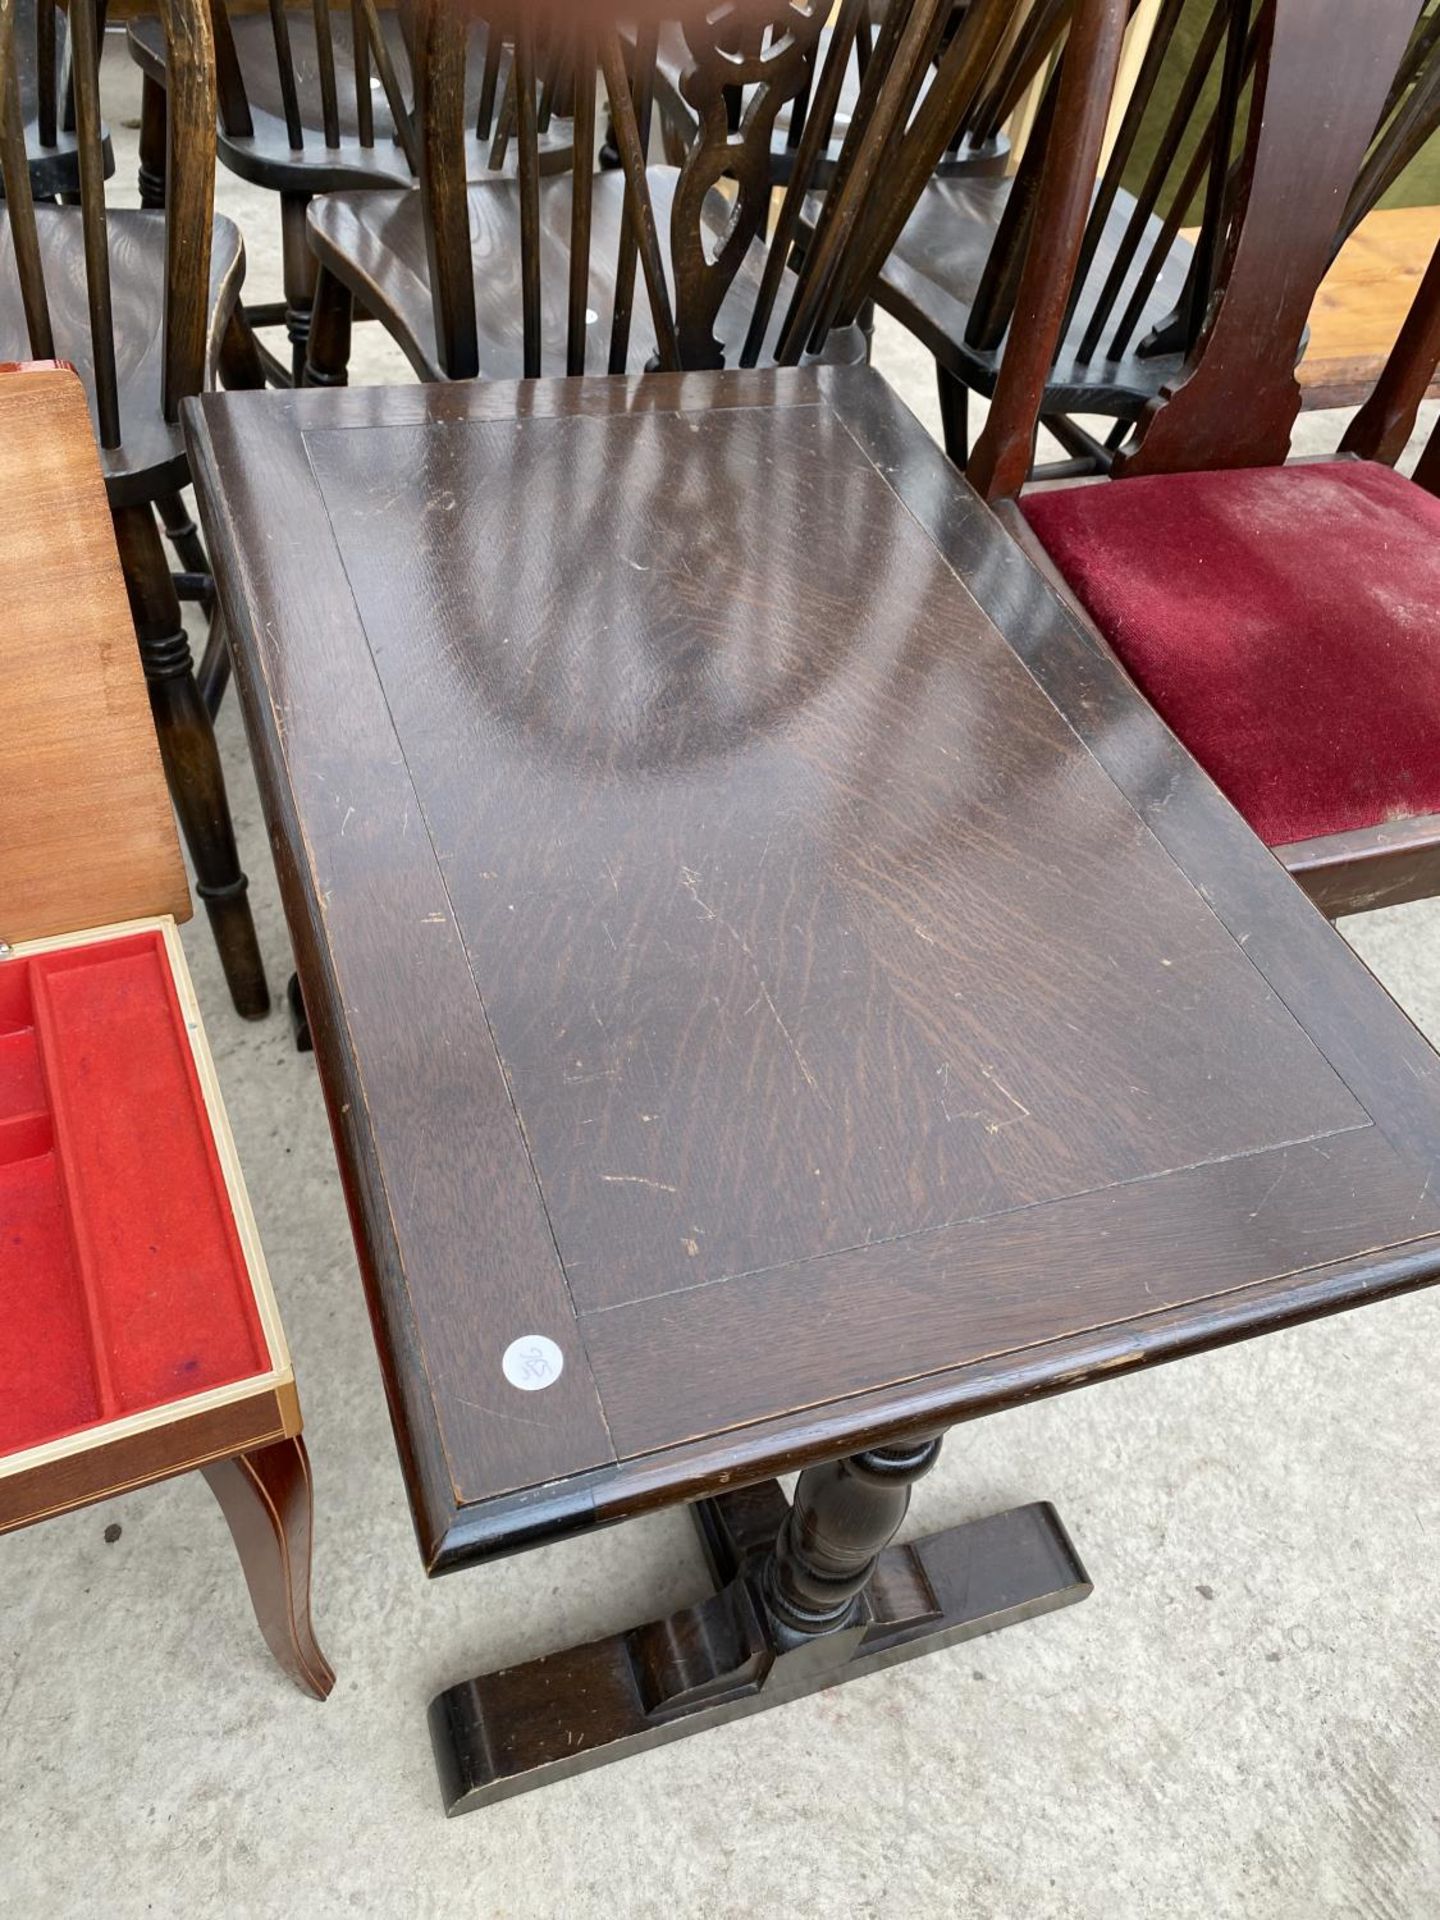 AN ITALIAN INLAID MAHOGANY SEWING TABLE WITH HINGED TOP AND A MAHOGANY COFFEE TABLE - Image 4 of 5